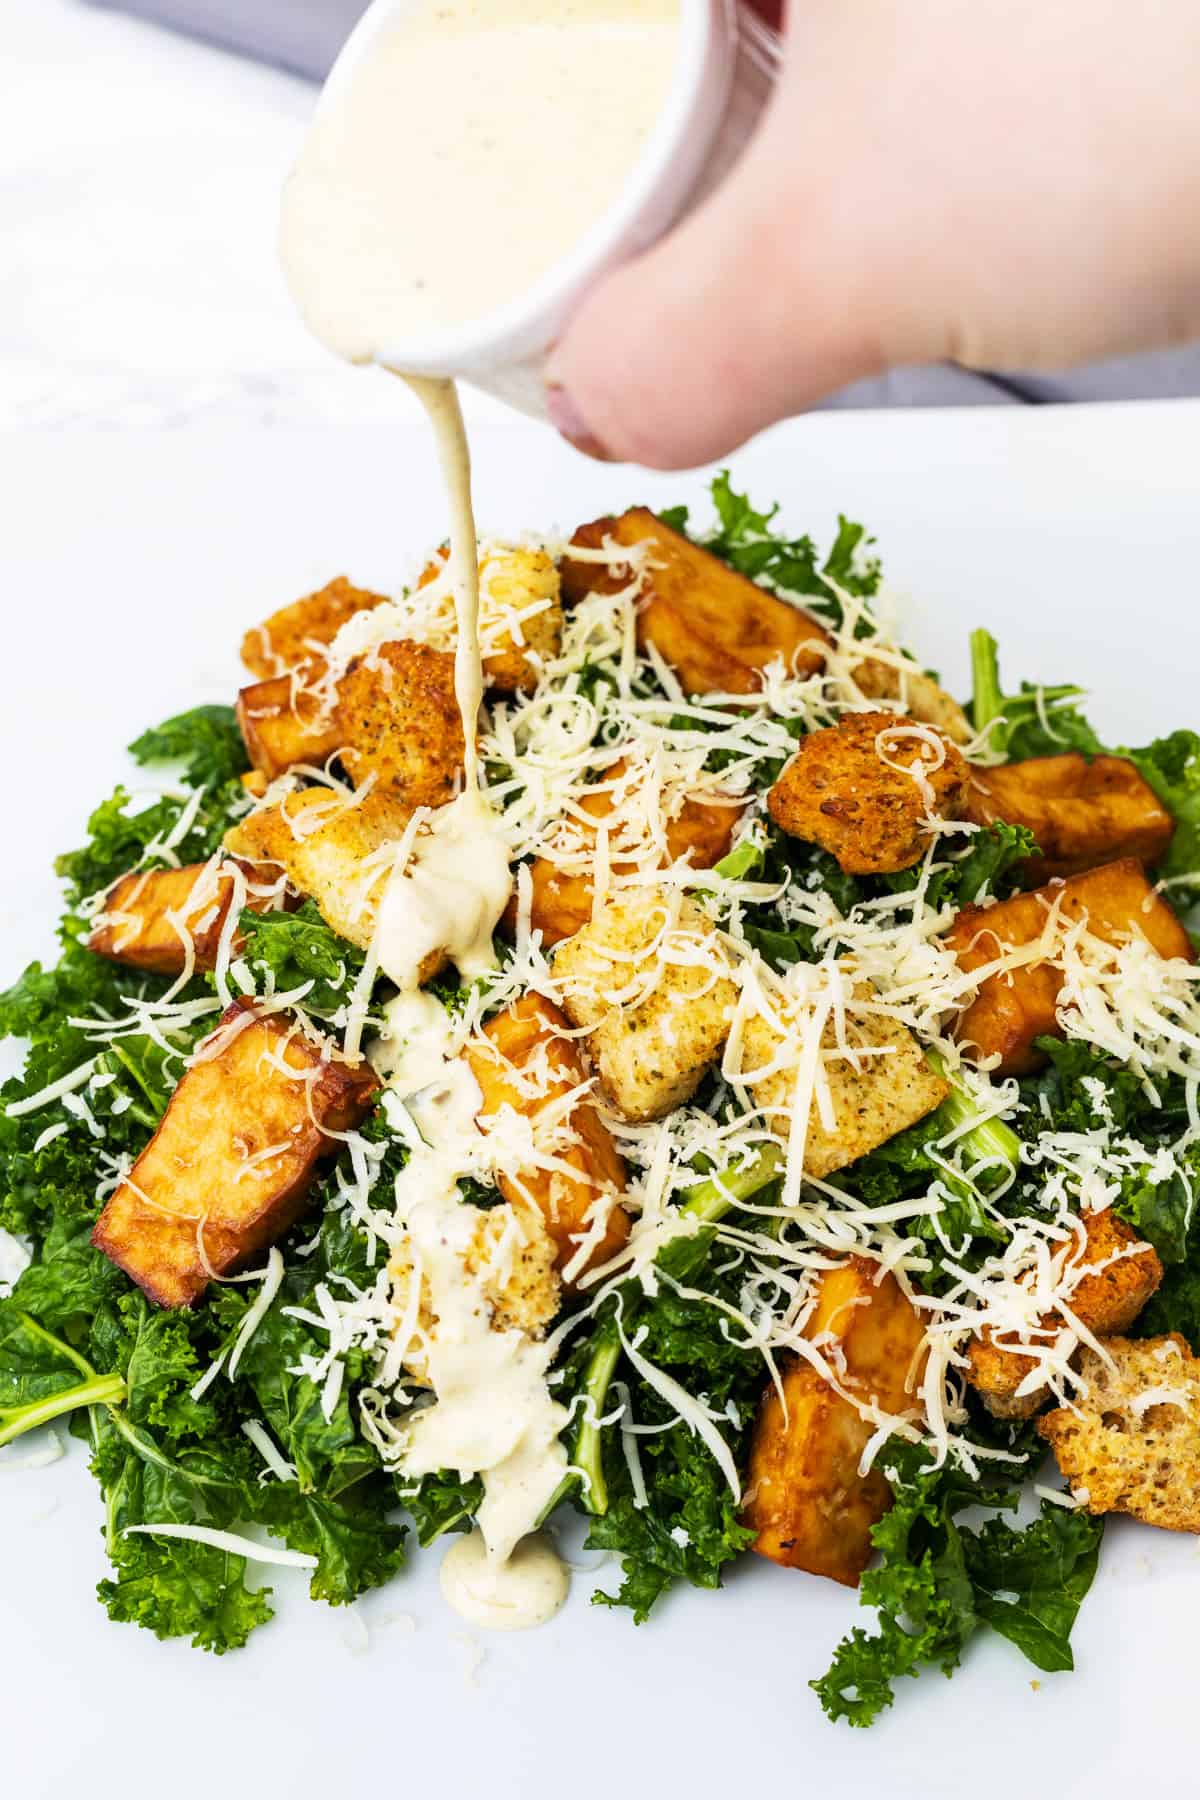 Hand pouring dressing onto plate of kale salad with croutons, tofu, and vegan cheese